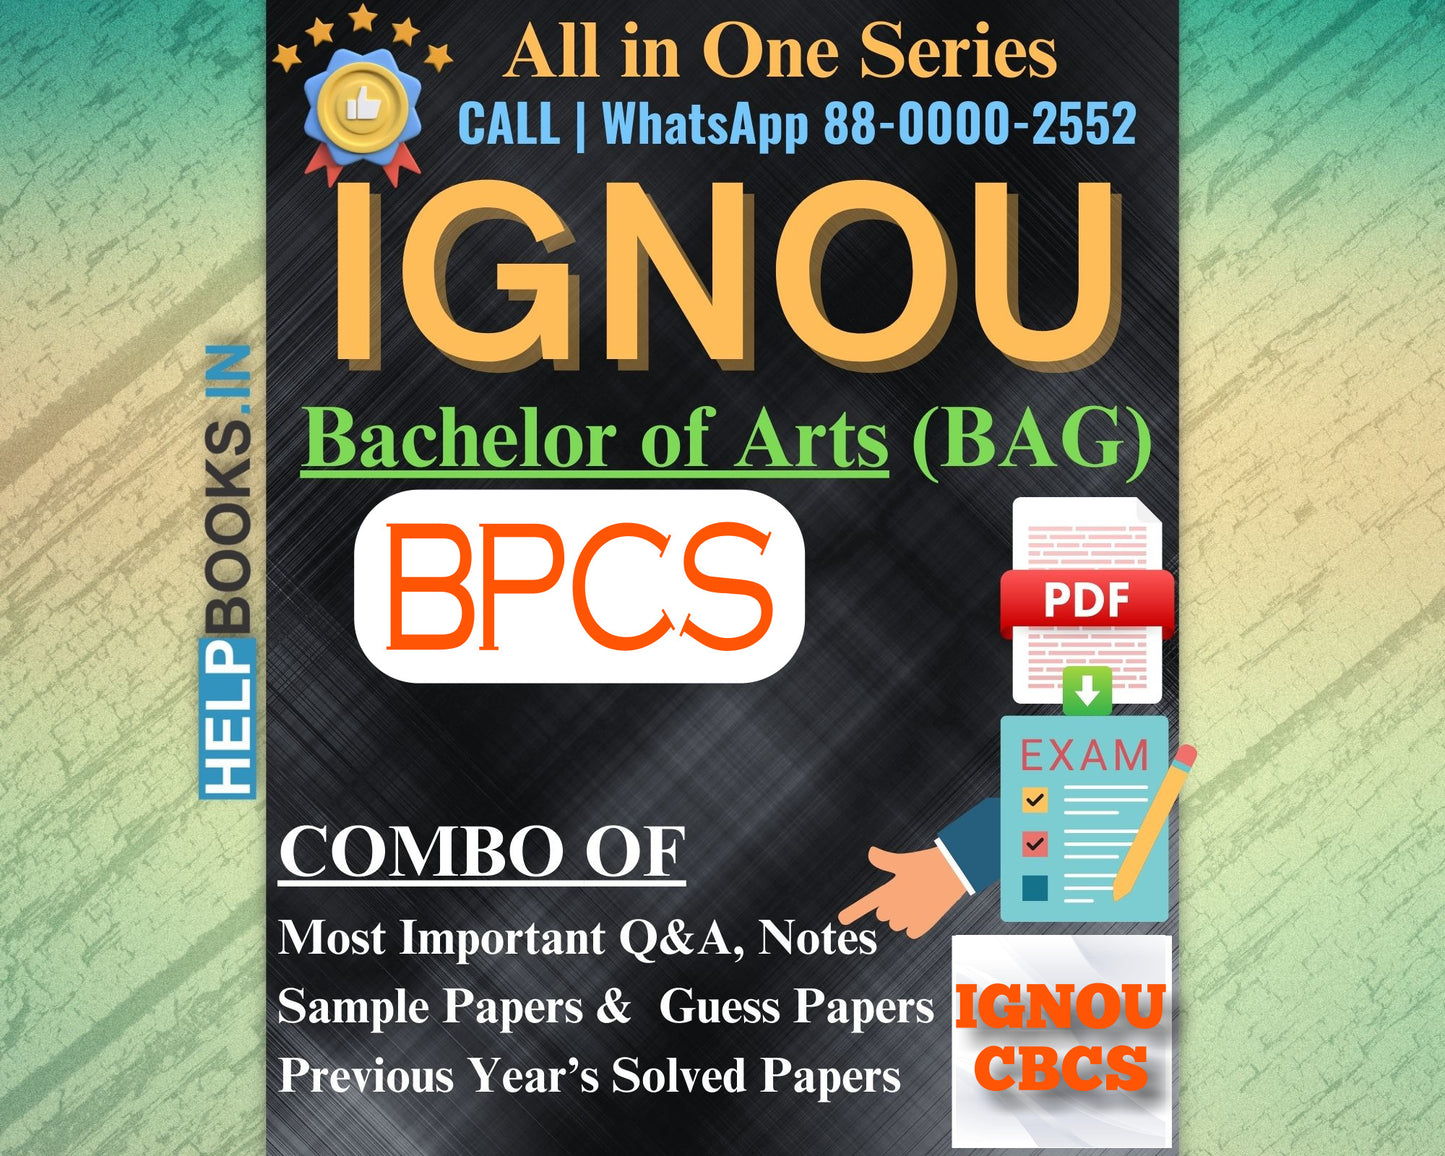 IGNOU BAG Online Study Package: Bachelor of Arts (BA) - Previous Year’s Solved Papers, Q&A, Exam Notes, Sample Papers, Guess Papers-BPCS183, BPCS184, BPCS185, BPCS186, BPCS187, BPCS188